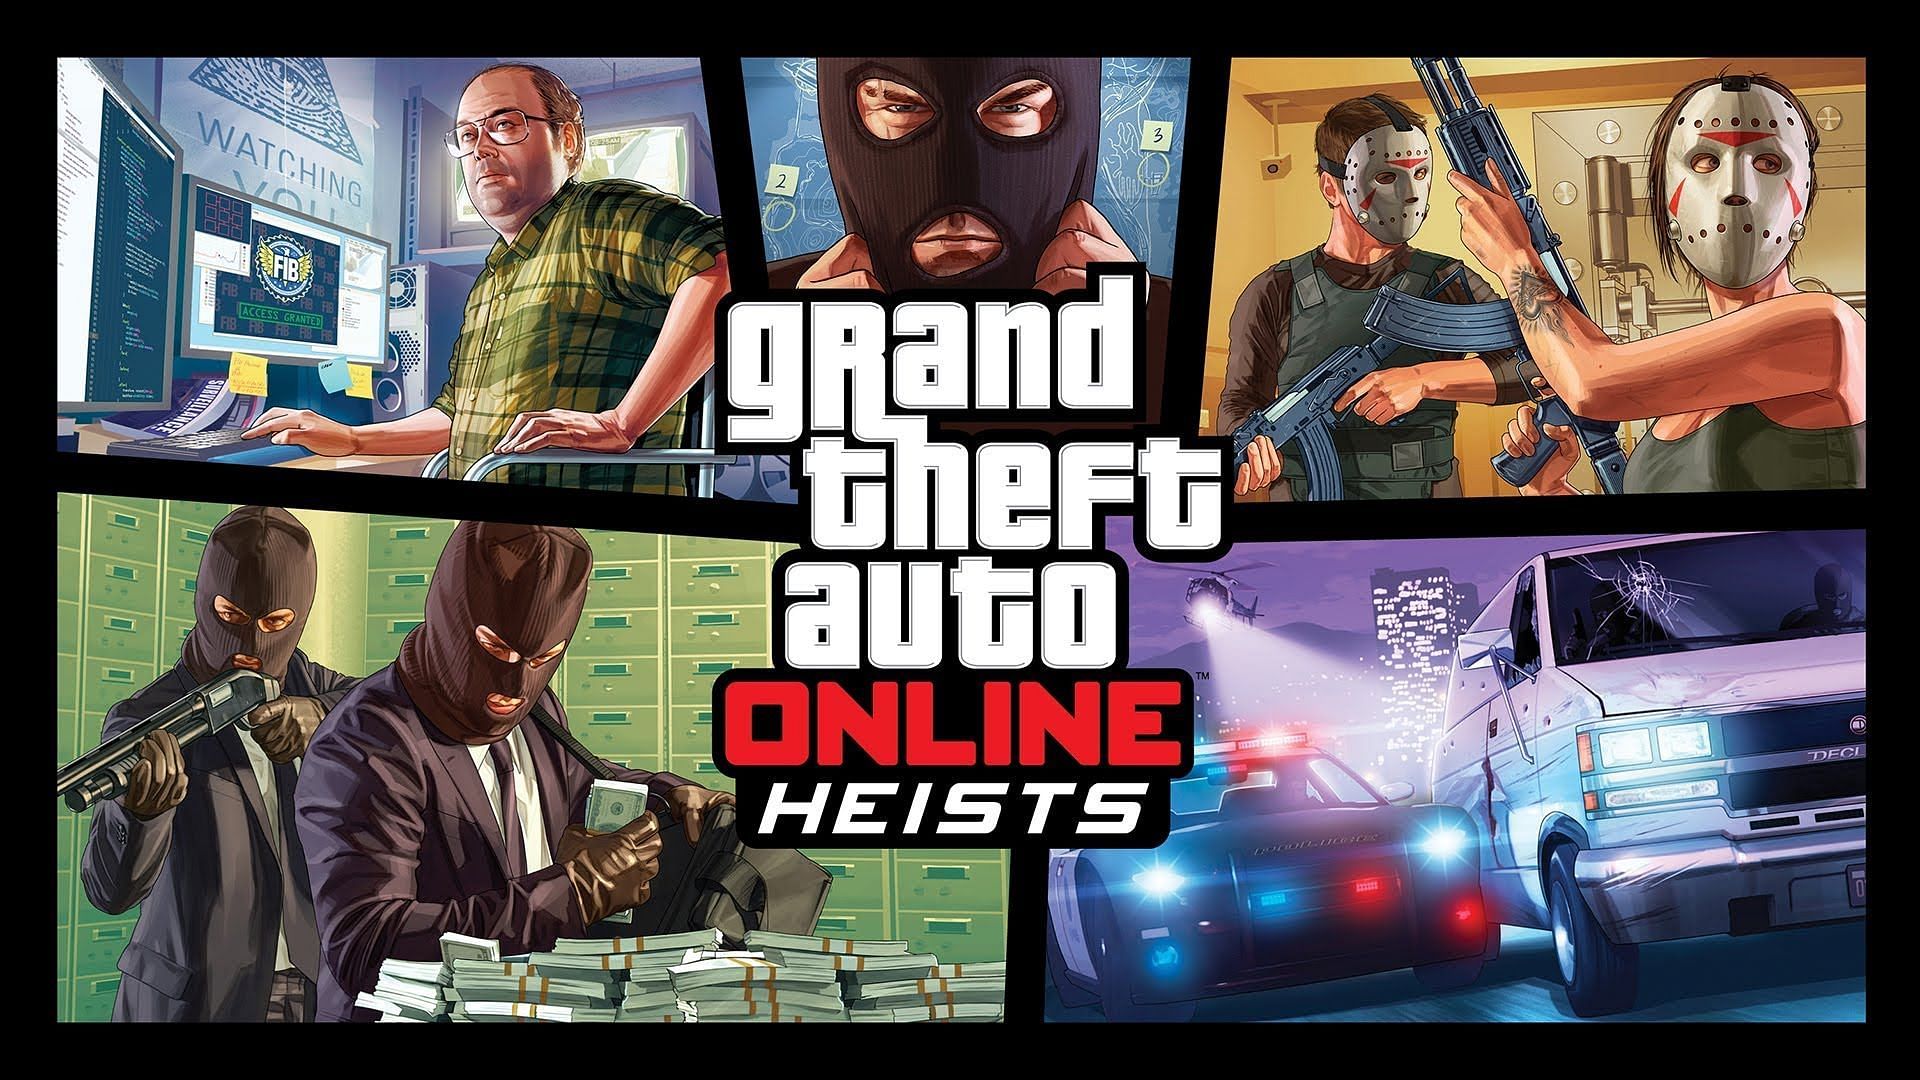 The official artwork for this update (Image via Rockstar Games)